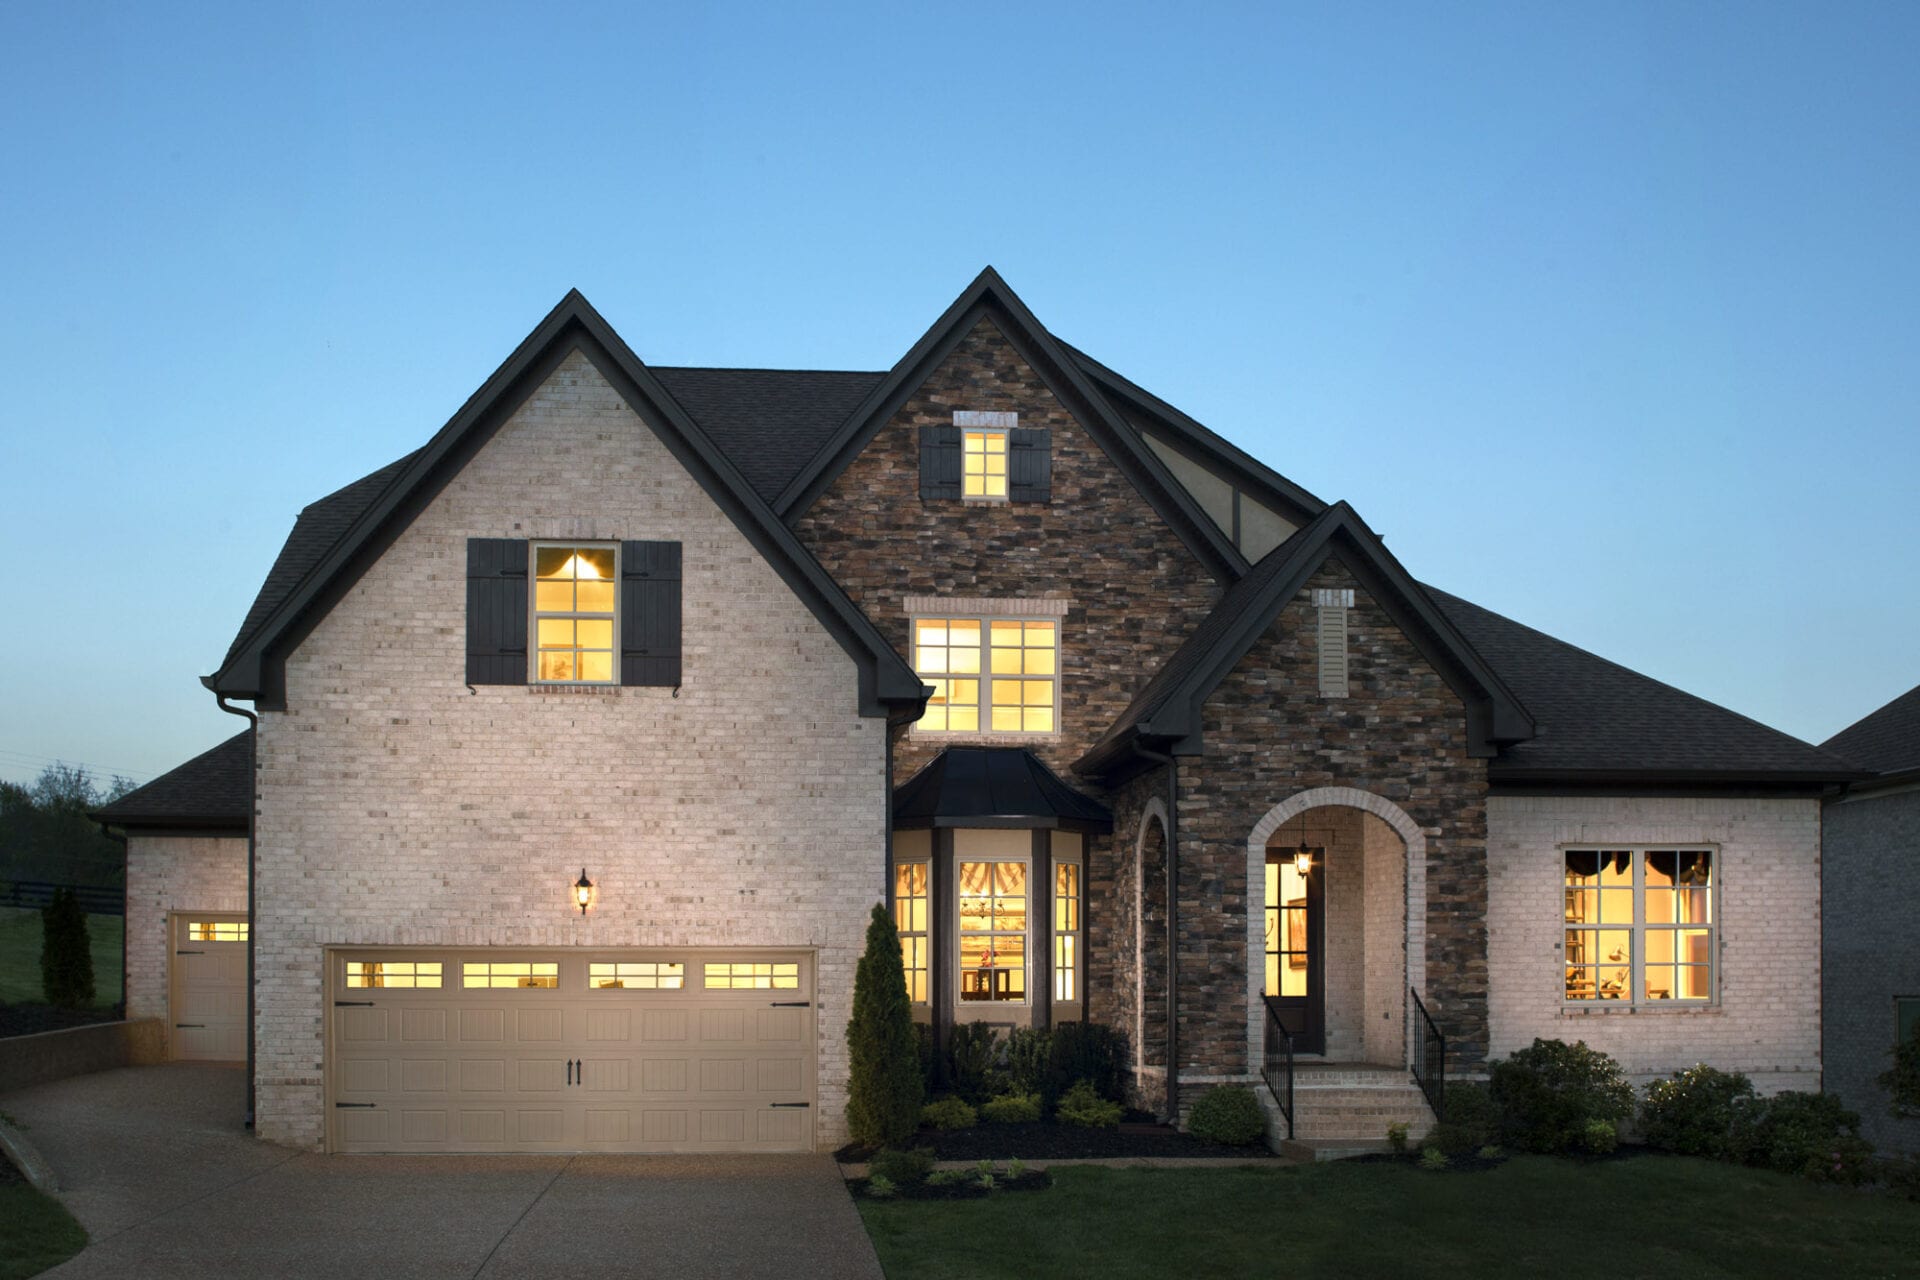 Ranch Style Homes from New Home Builders - Still Springs Ridge New Home Communities in Nashville, TN